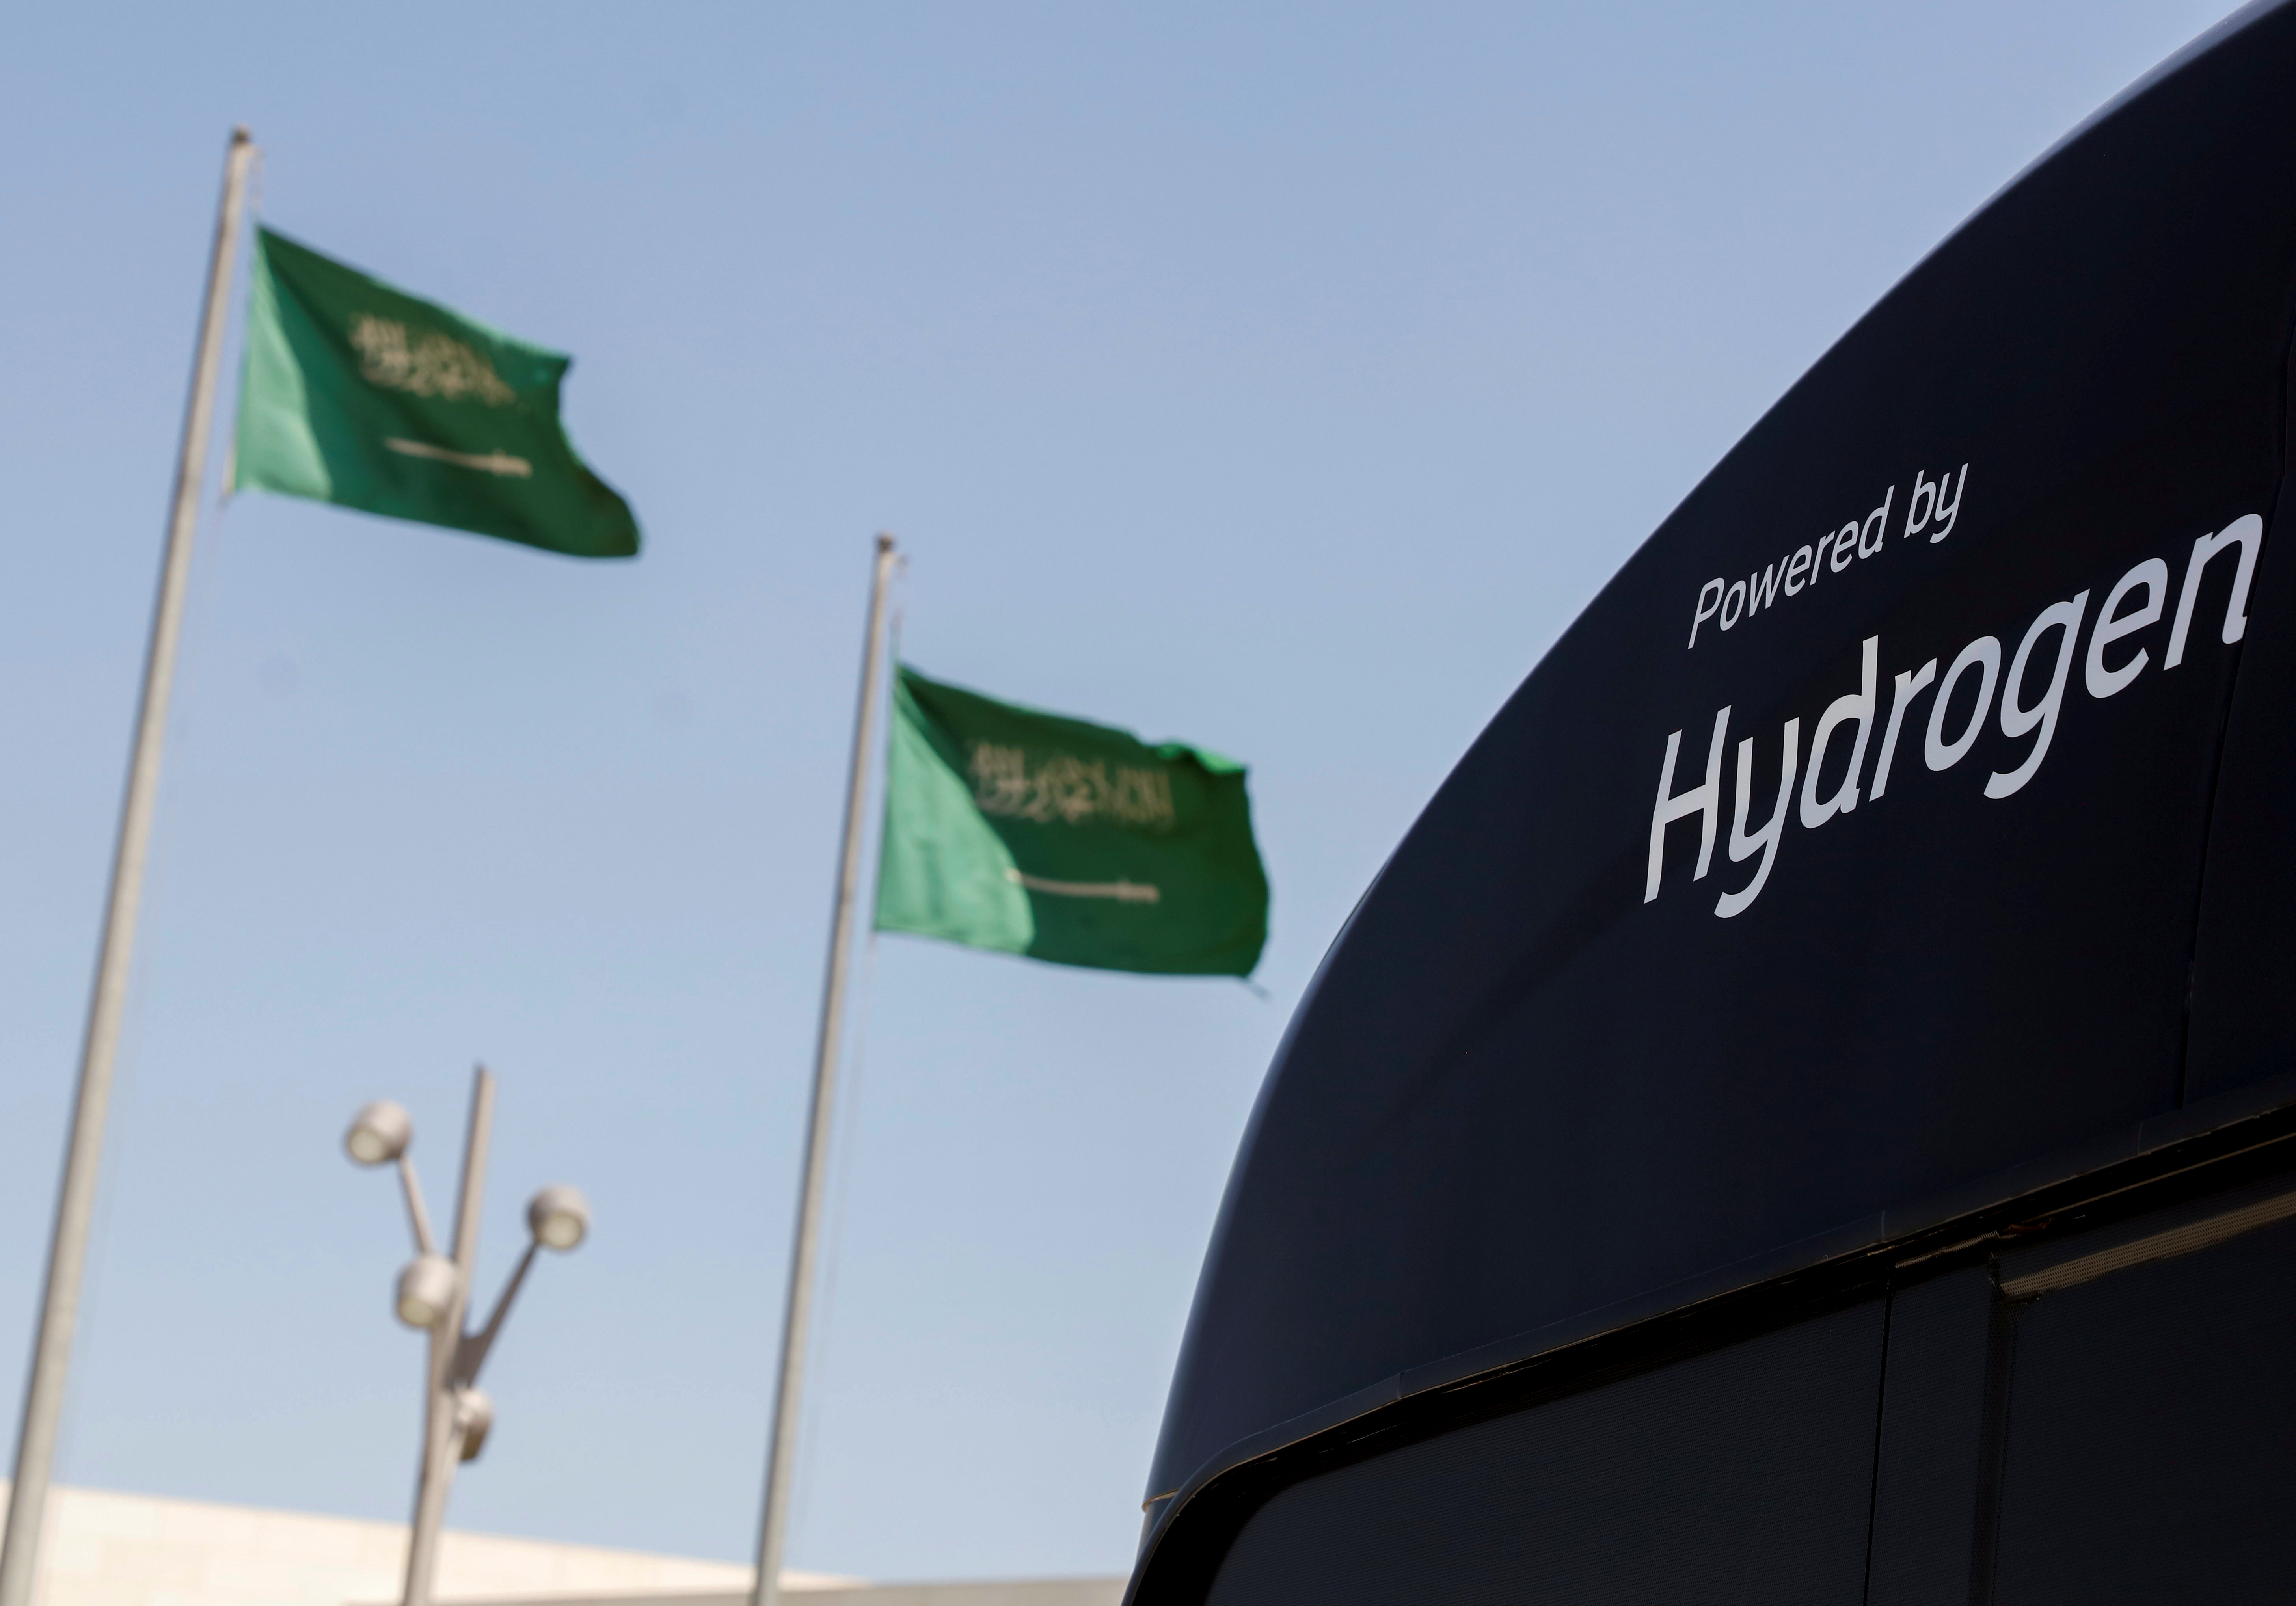 Hydrogen powered mobile unite is seen during Saudi Aramco's media trip to demonstrate Hydrogen automotive technology at Techno Valley Science Park in Dhahran, Saudi Arabia, June 27, 2021. REUTERS/Hajer Abdulmohsin